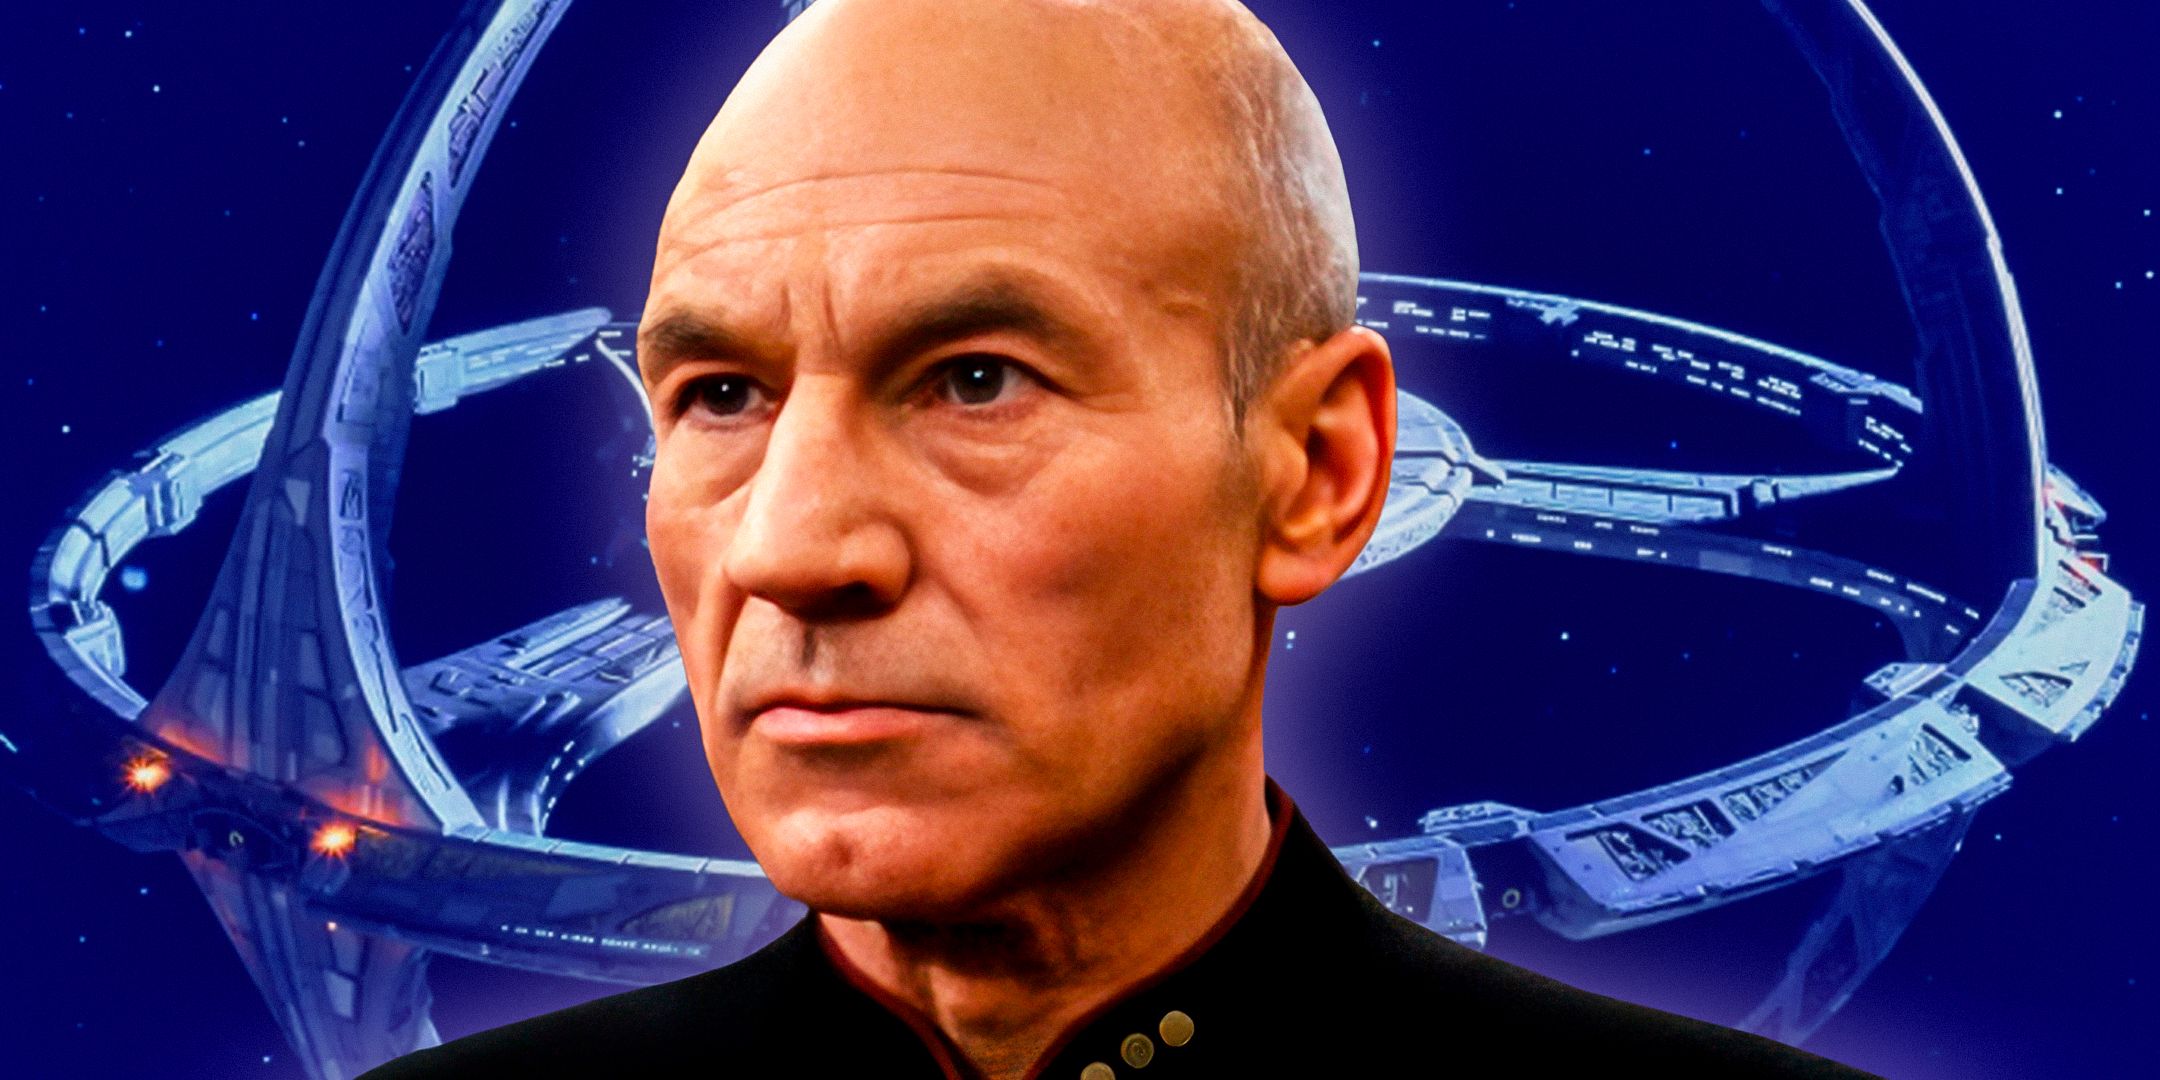 Captain Jean-Luc Picard looking series in front of Star Trek's Deep Space Nine space station.